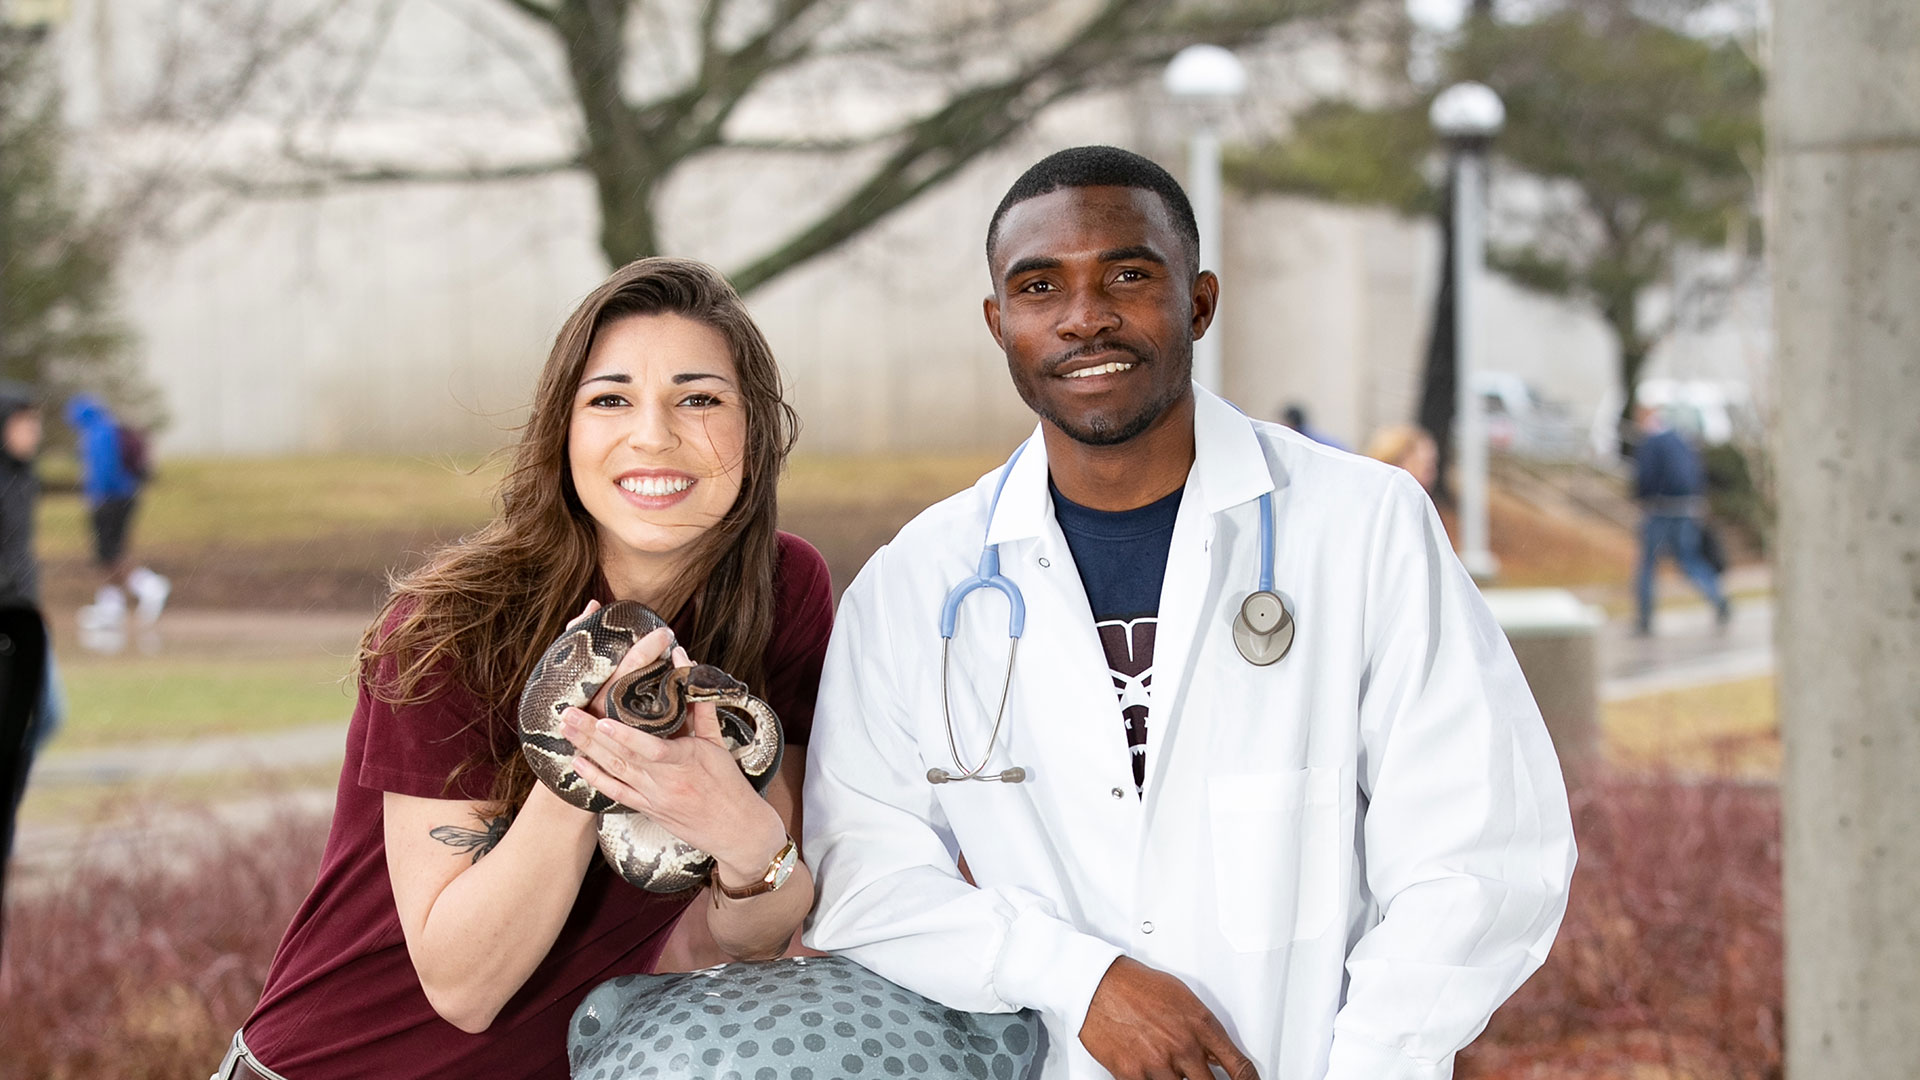 Two biology students pose together outside of Temple Hall. One student is holding a snake, and the other student is wearing a lab coat and stethoscope.